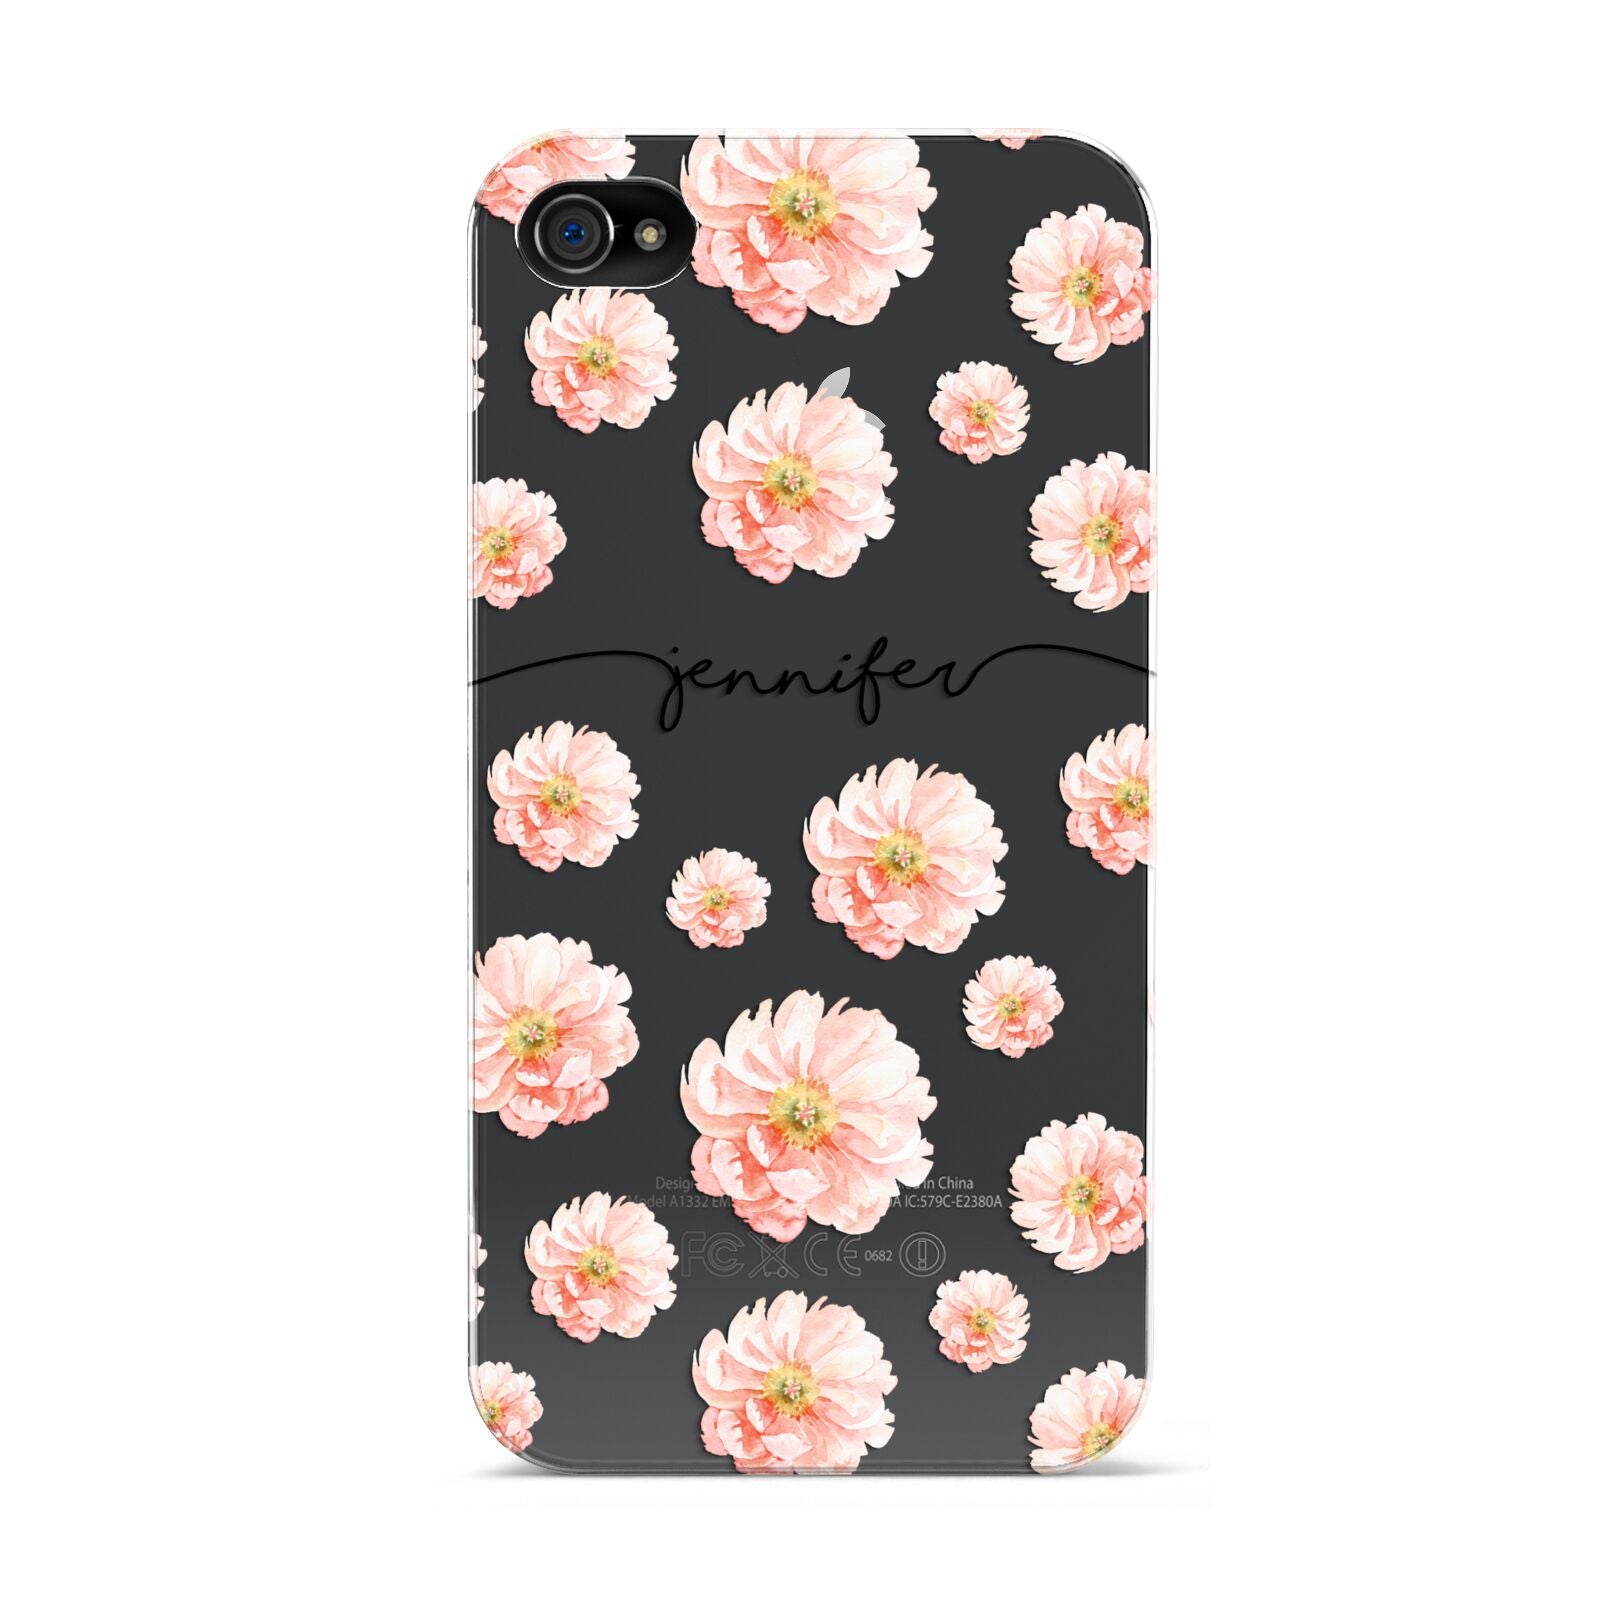 Personalised Flower Name Apple iPhone 4s Case